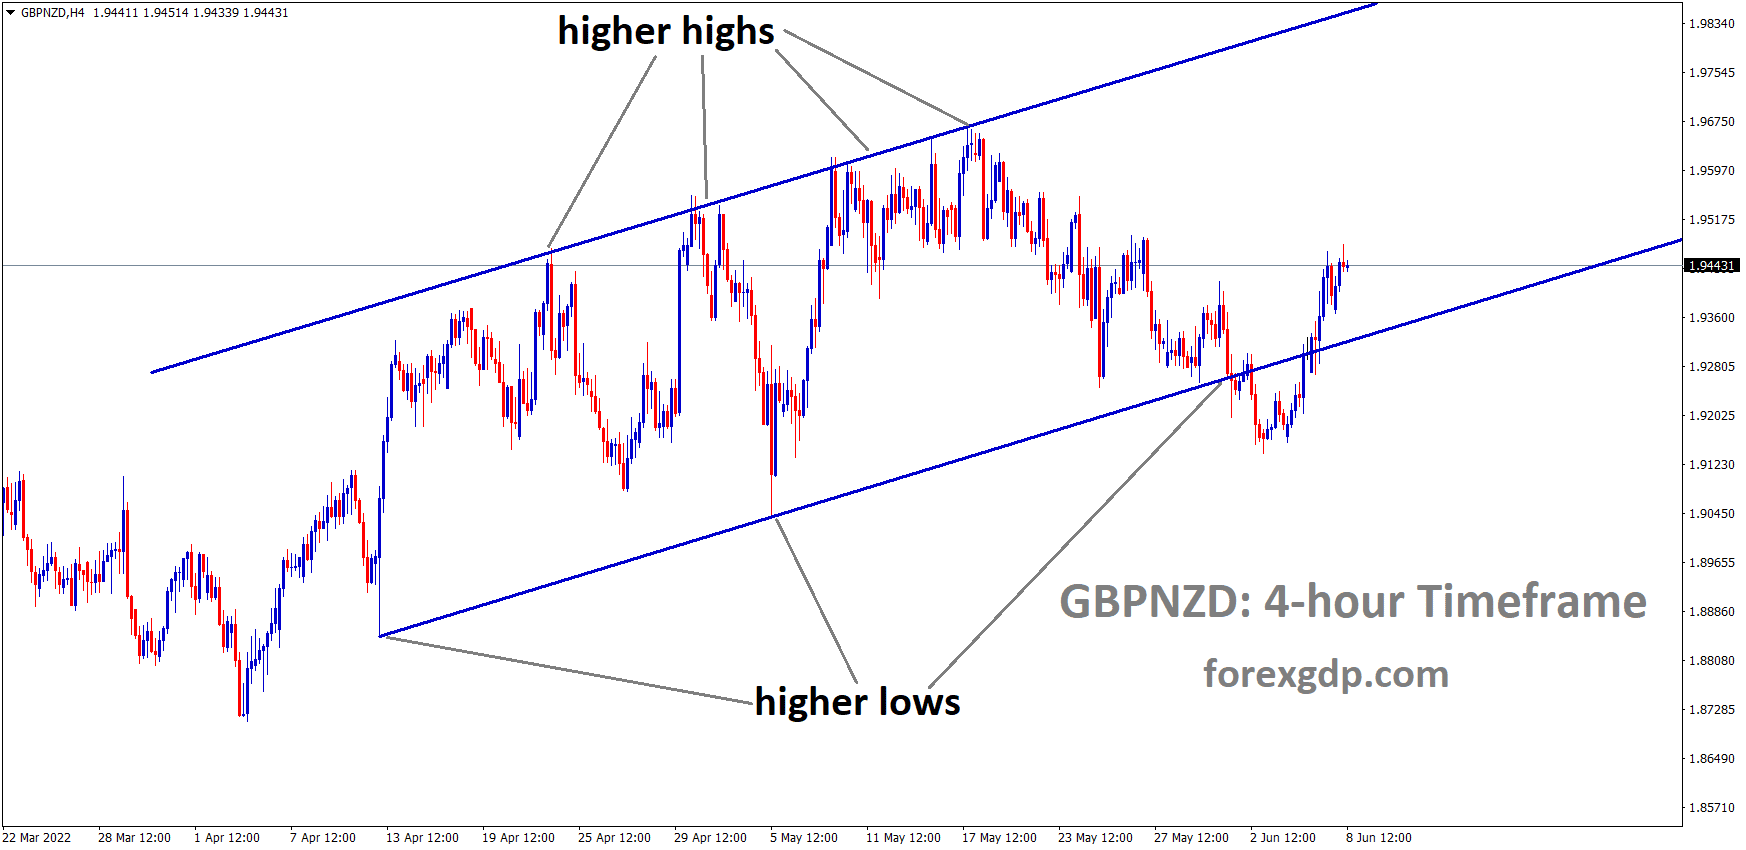 GBPNZD is moving in an Ascending channel and the Market has rebounded from the higher low area of the channel